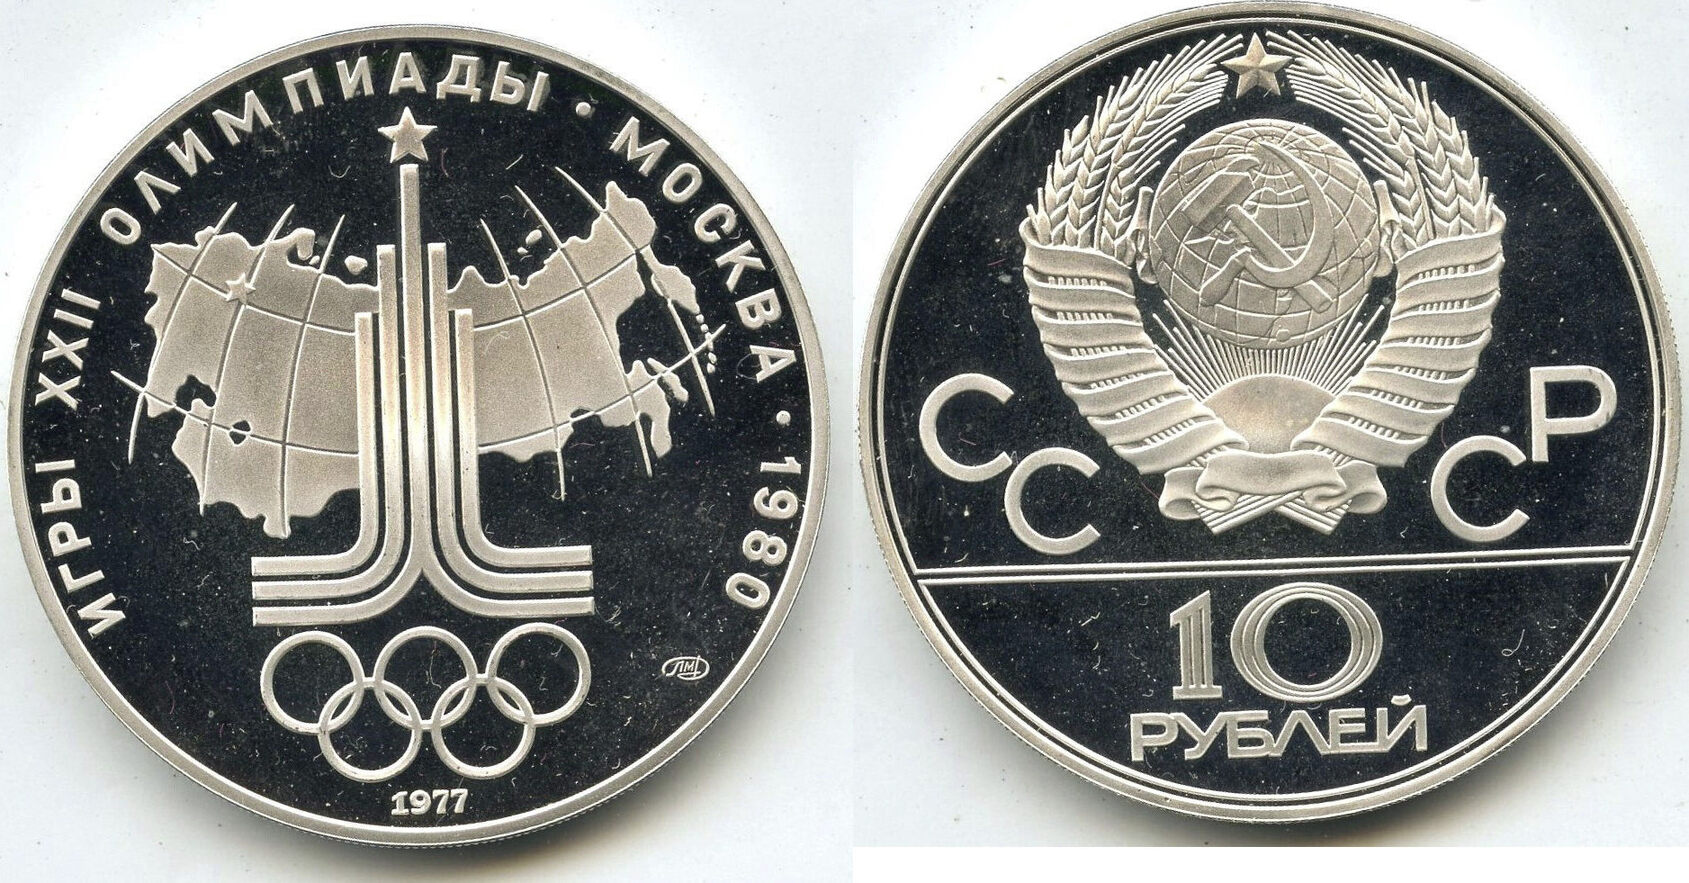 Europa 10 Roubles 1980 1977 / Moscow Olympics USSR Proof Silver